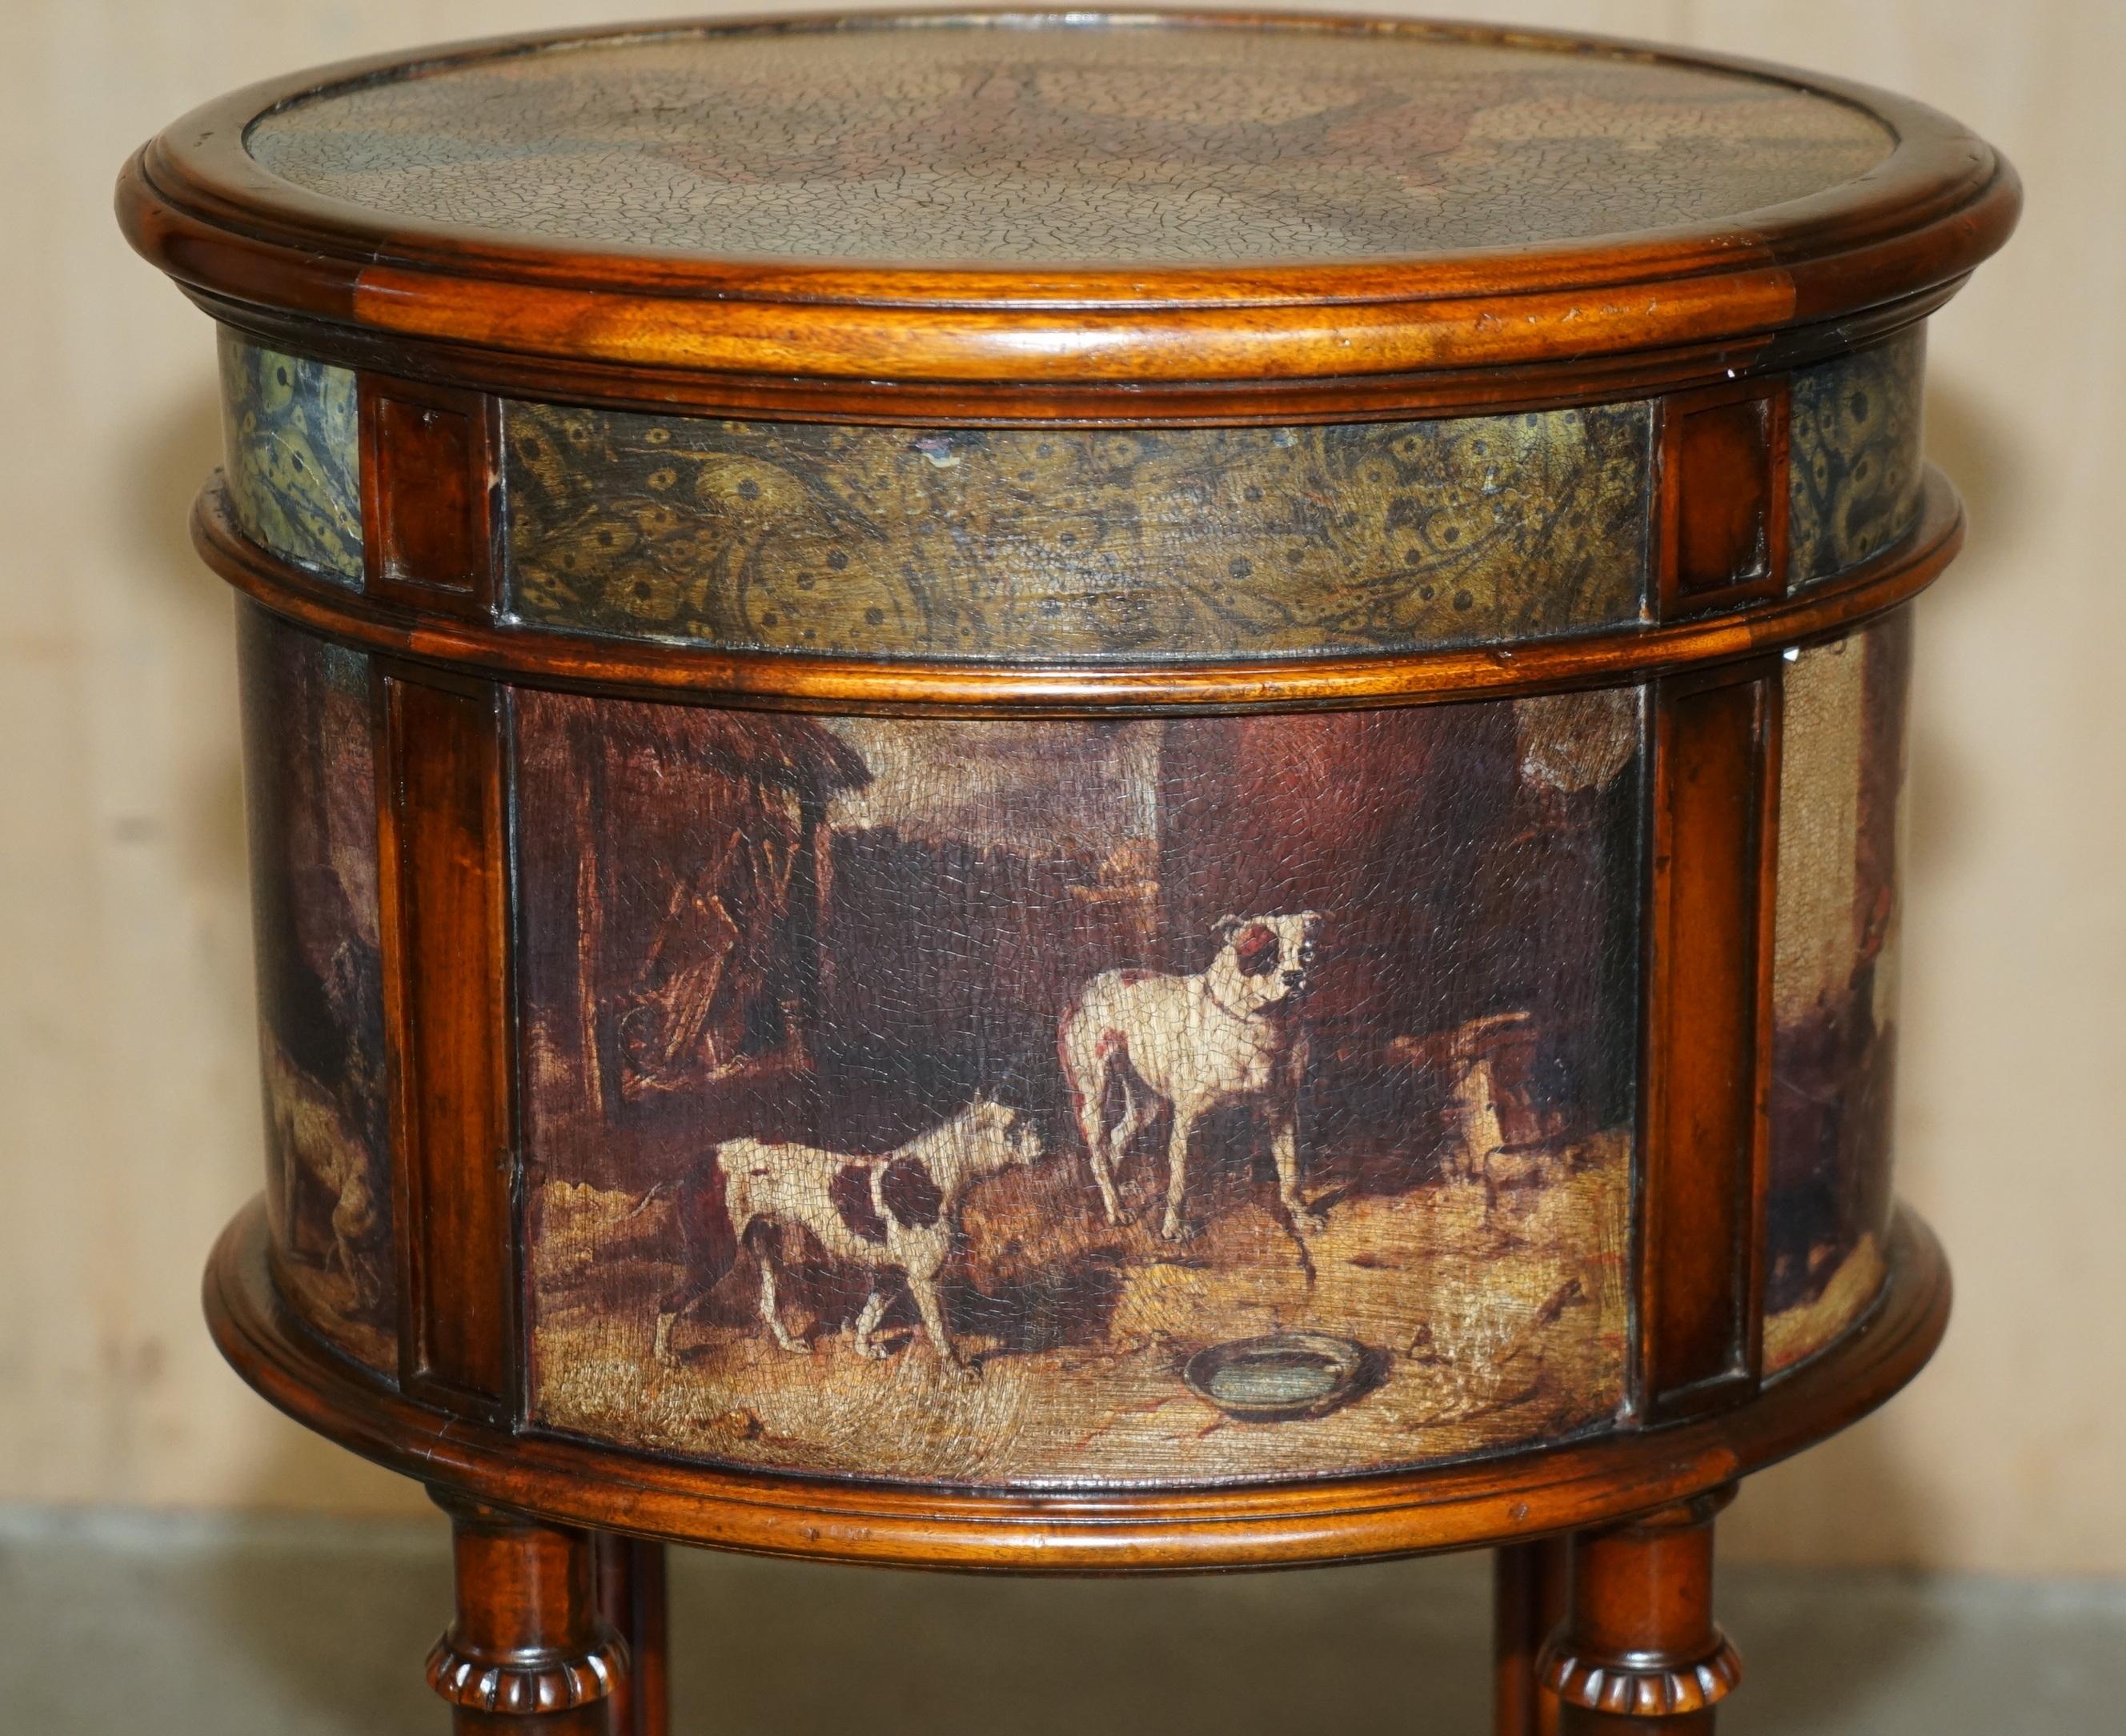 EXQUISITE TWO TIER TALL SiDE TABLE CABINET LEATHER CLADDED & PAINTED WITH DOGS For Sale 5